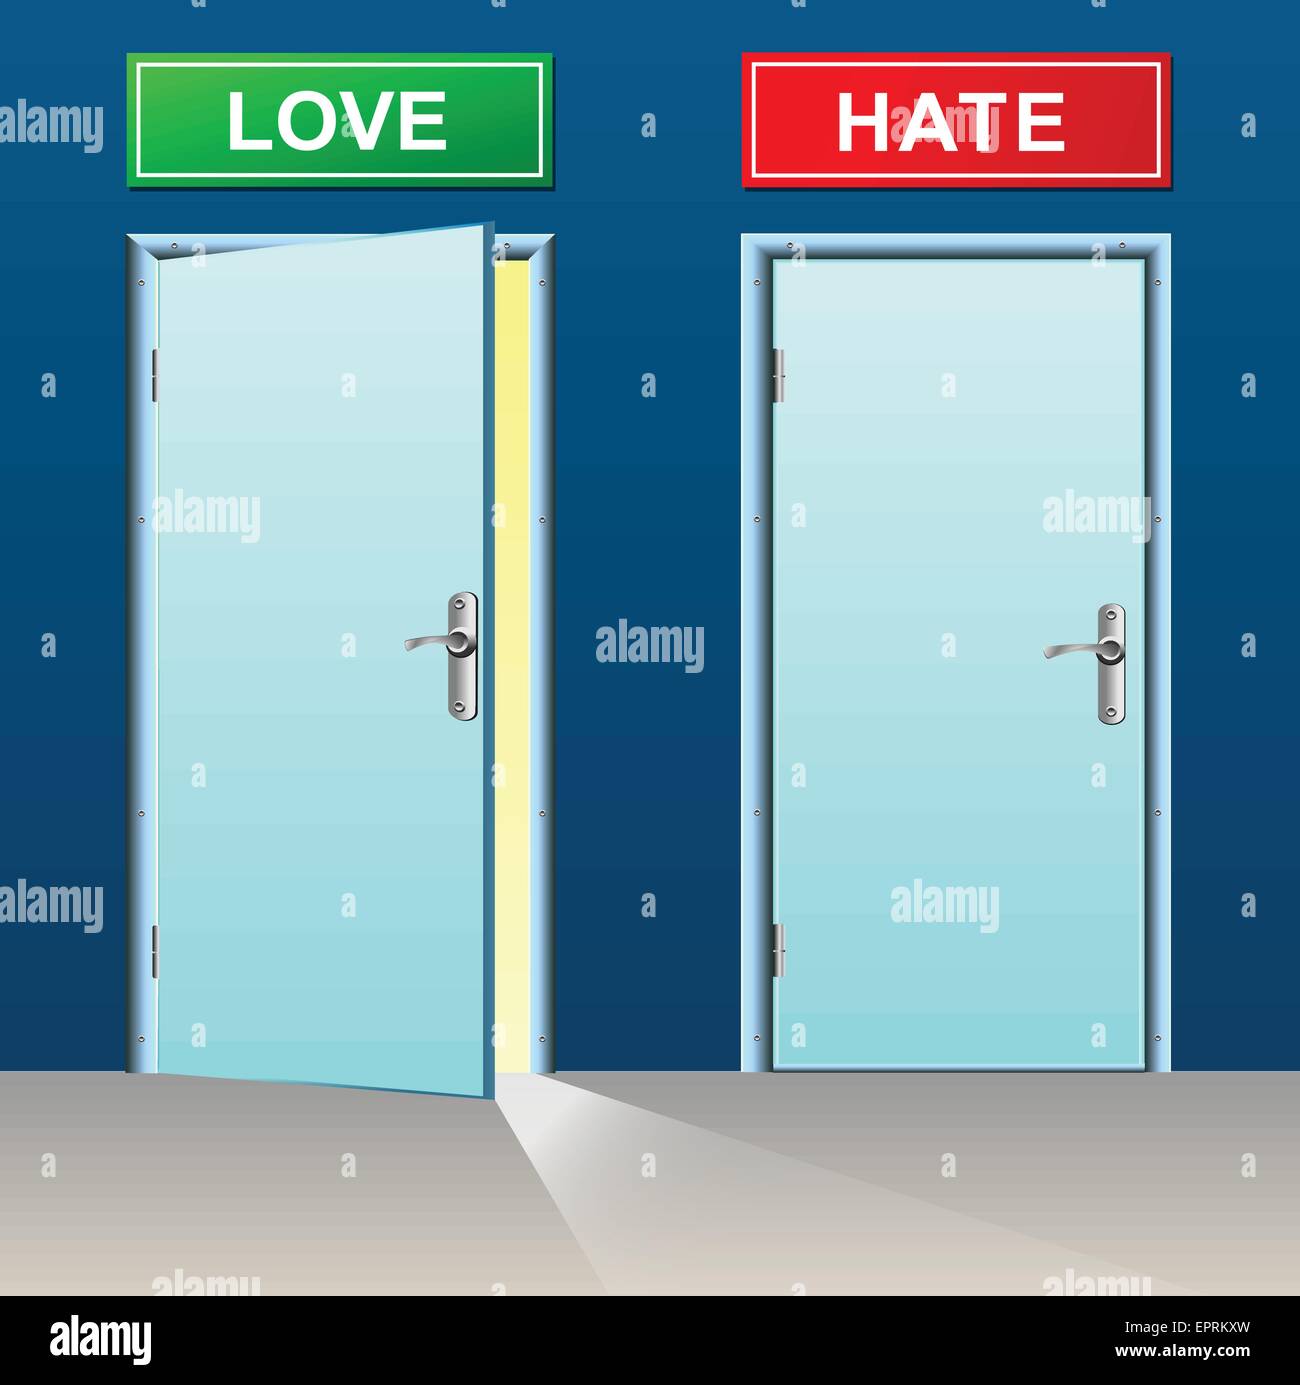 illustration of love and hate doors concept Stock Vector